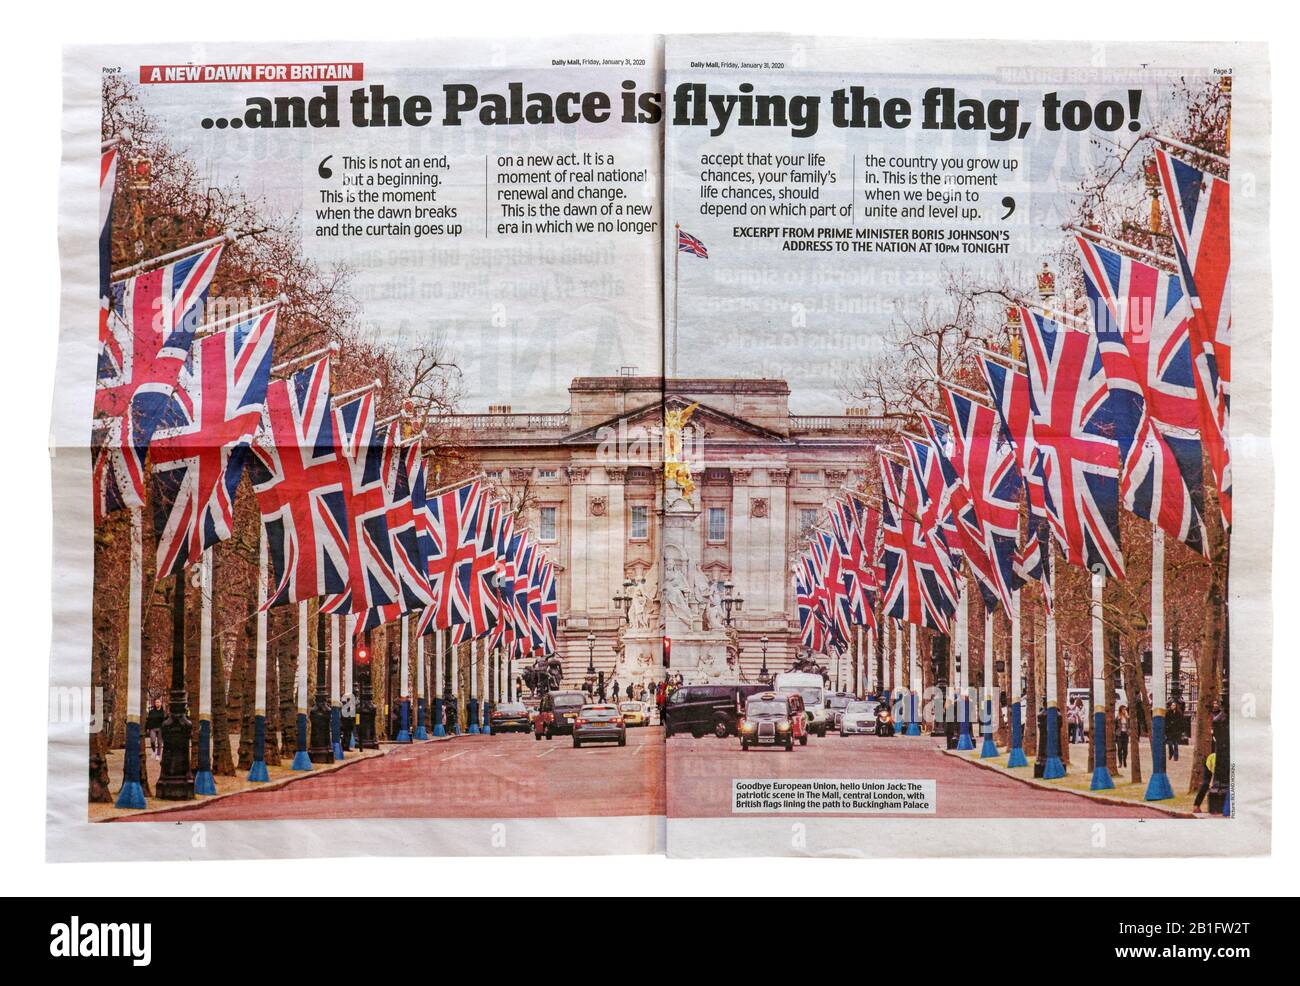 Il Daily Mail del 31st gennaio 2020 con la Brexit Headline "The Palace is Flying the Flag Too" Foto Stock